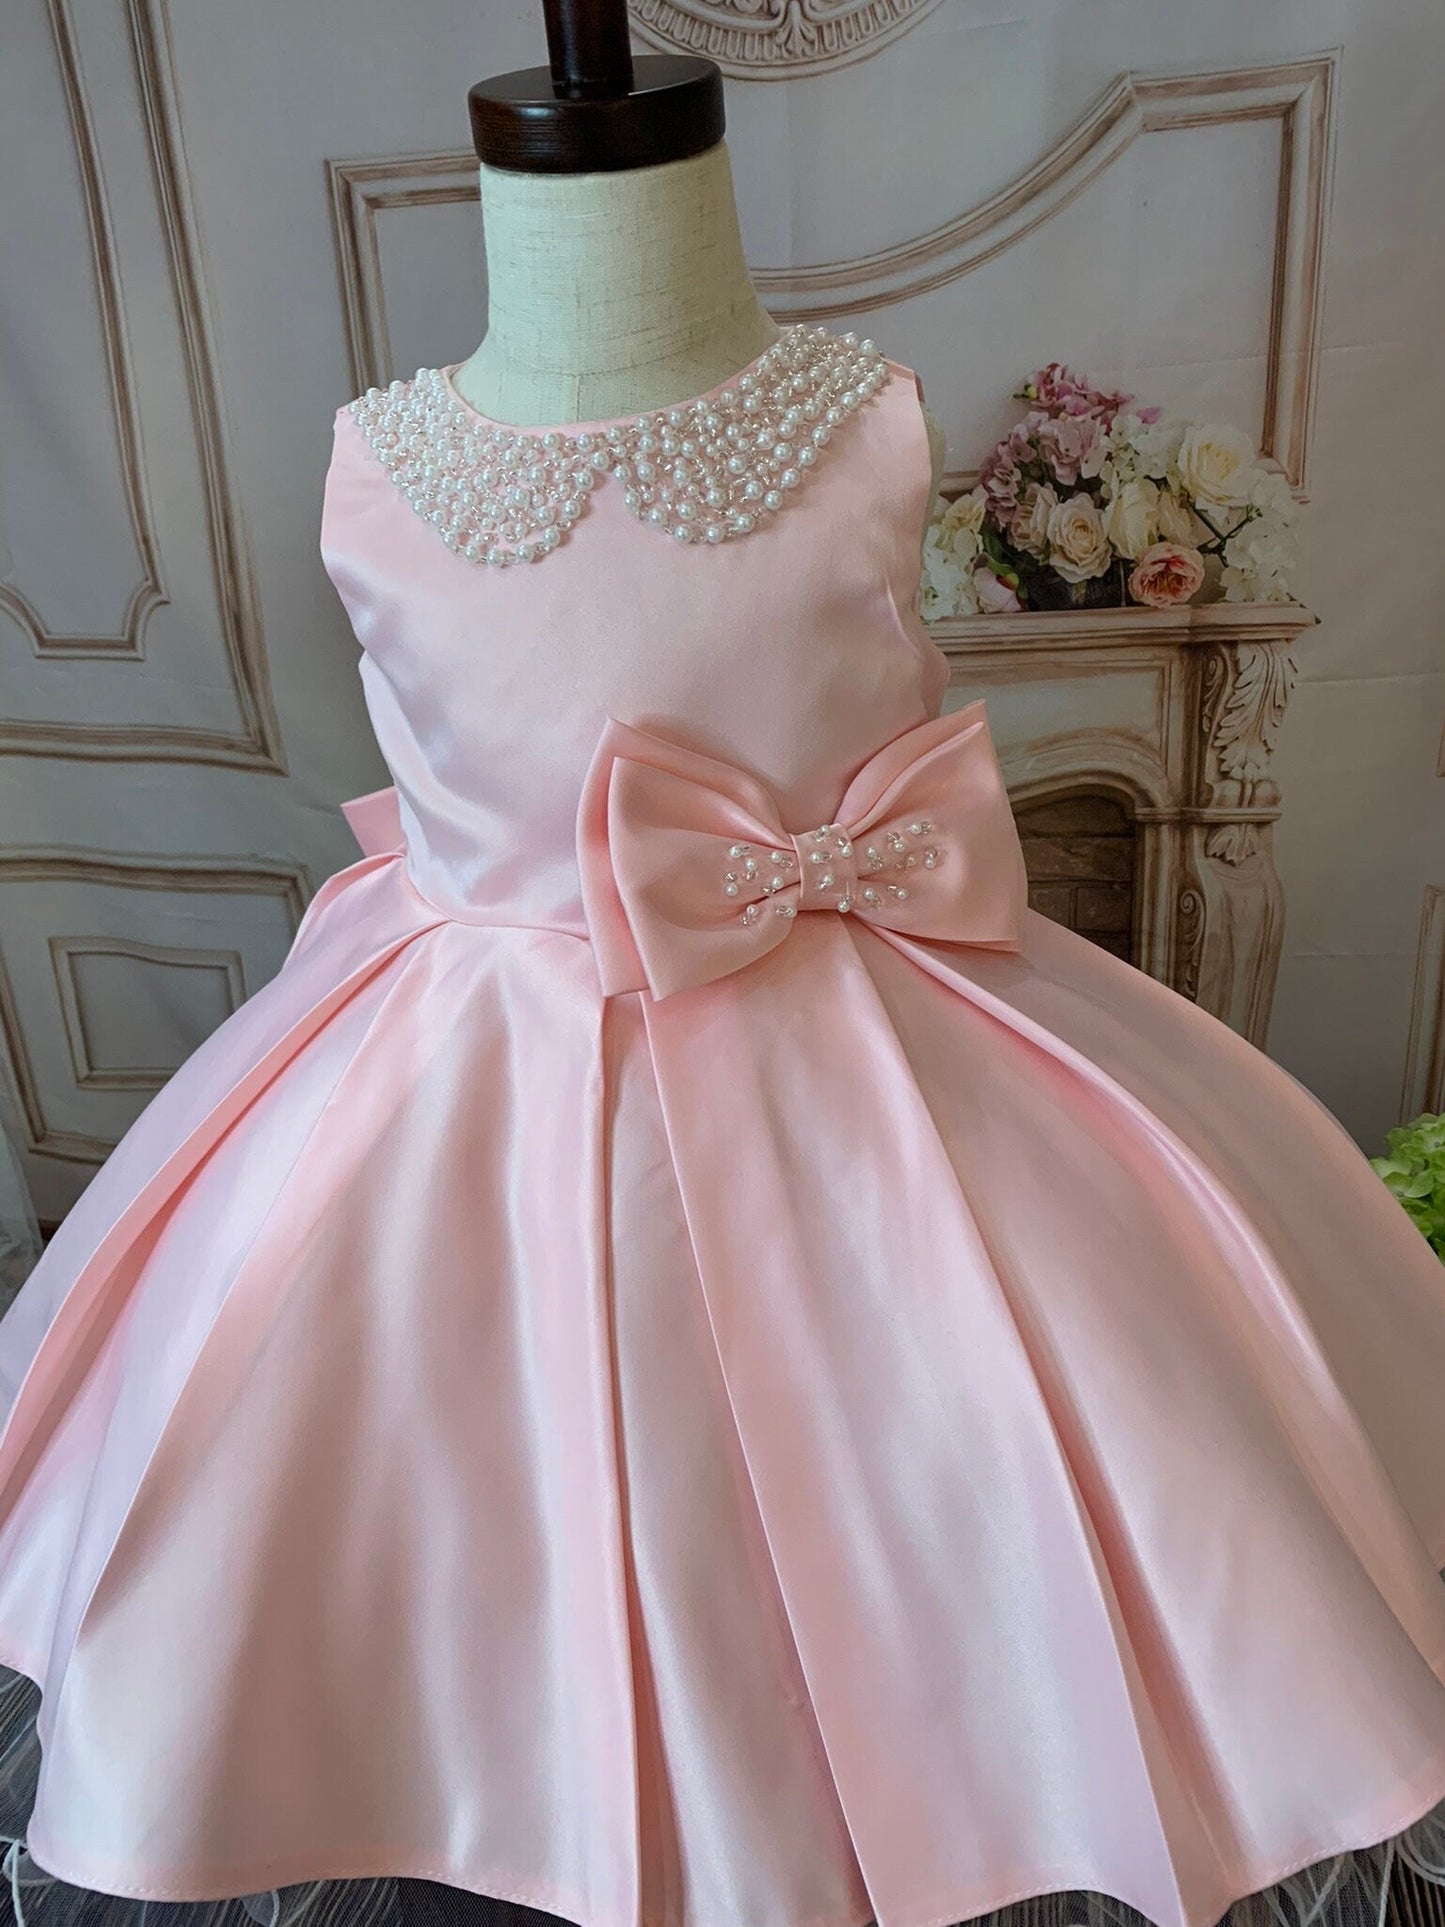 Little Girl Glamorous Pink or White Party Dress - TinySweetPeaBoutique